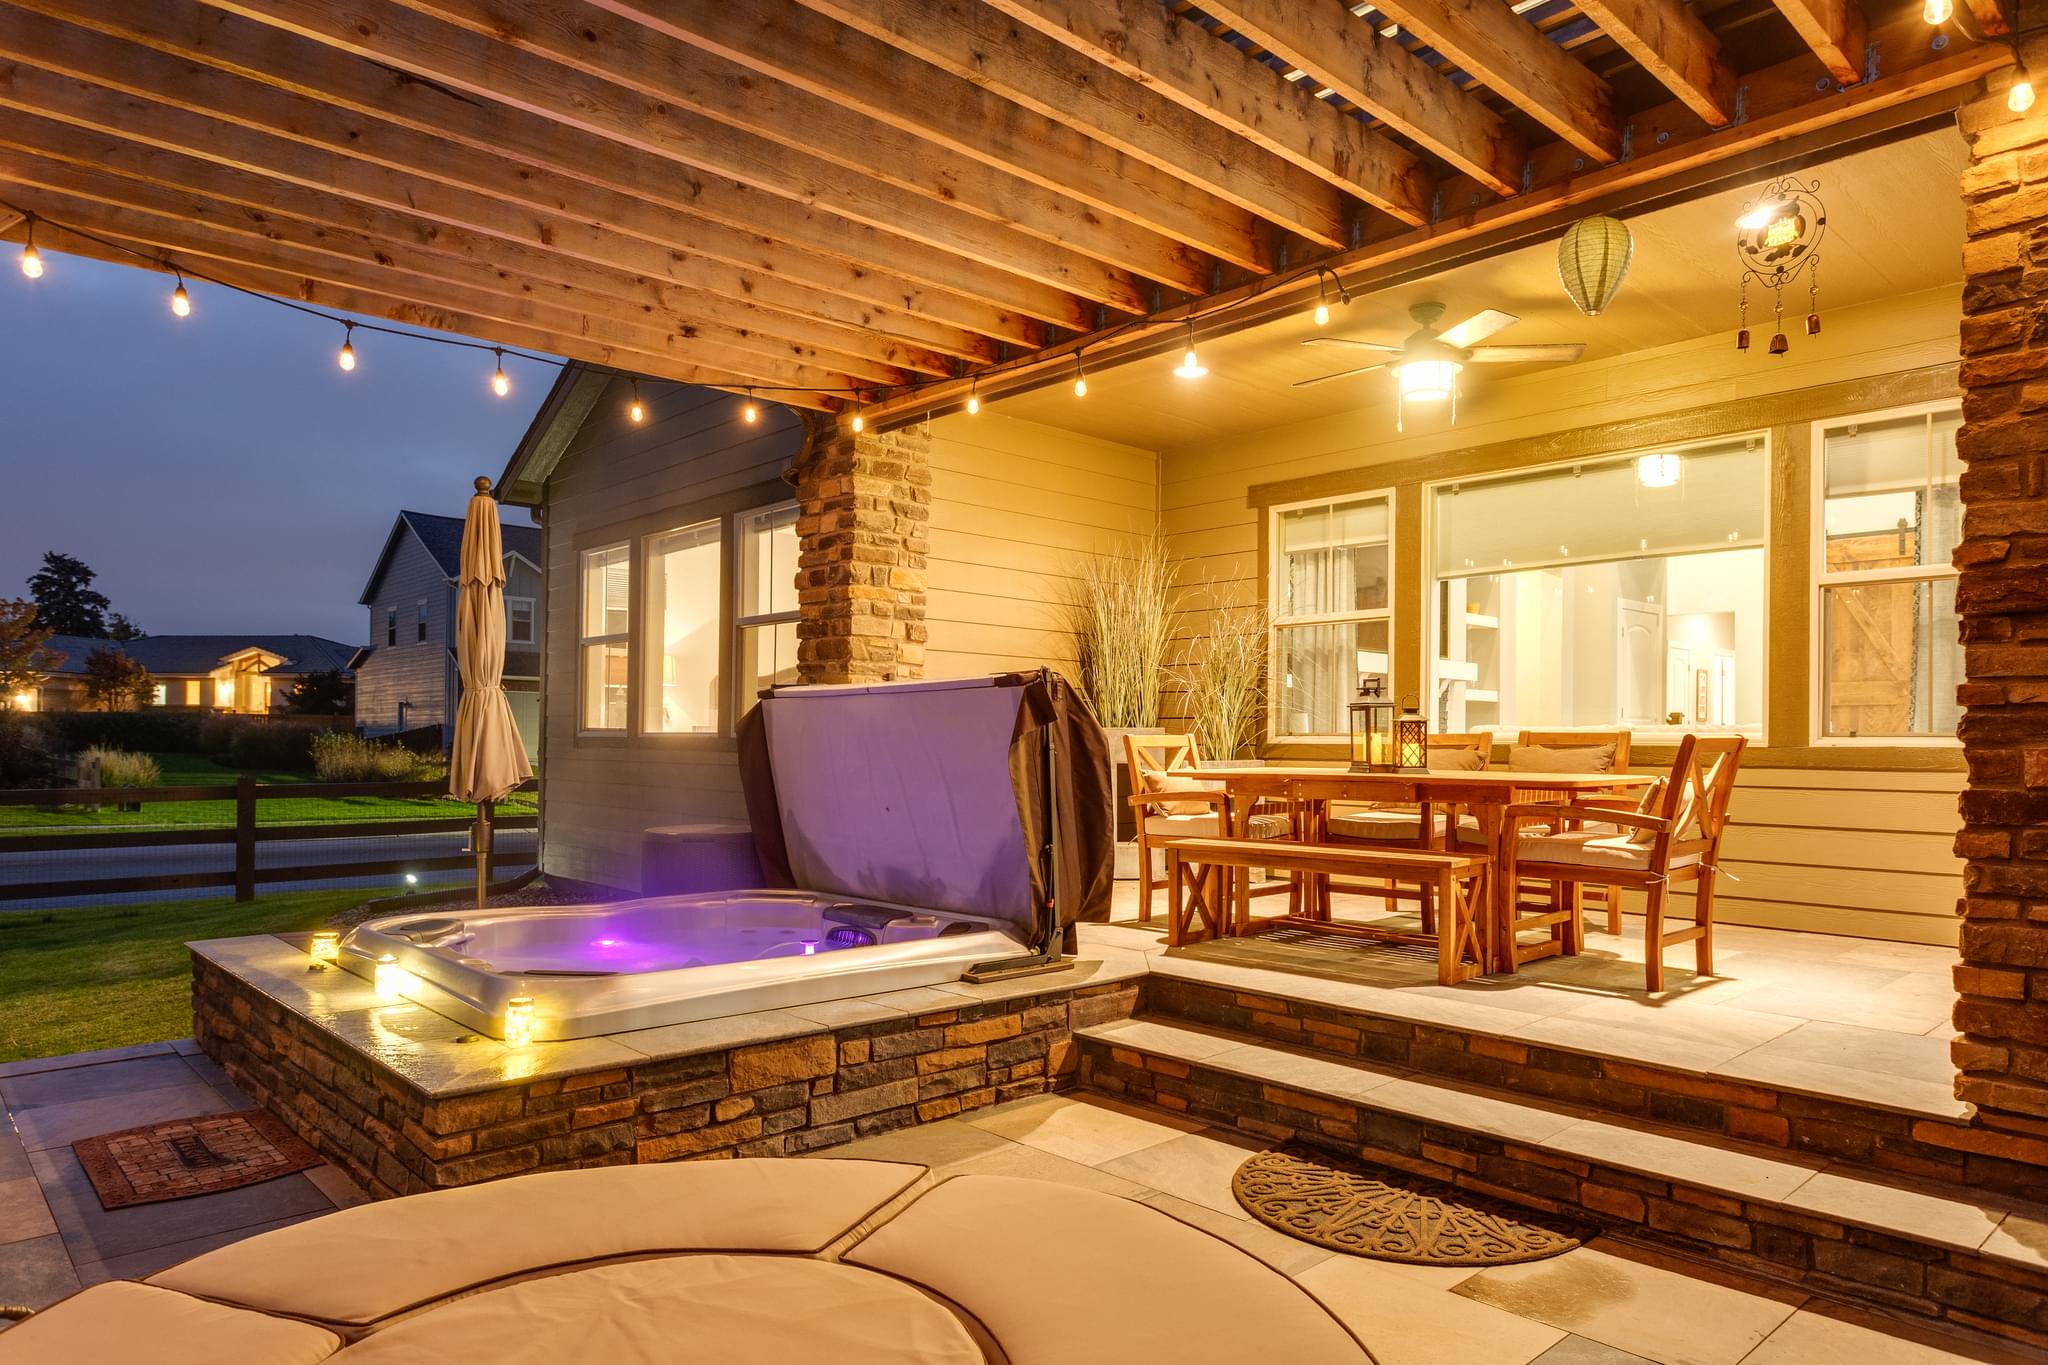 Enjoy a quiet evening on your covered patio